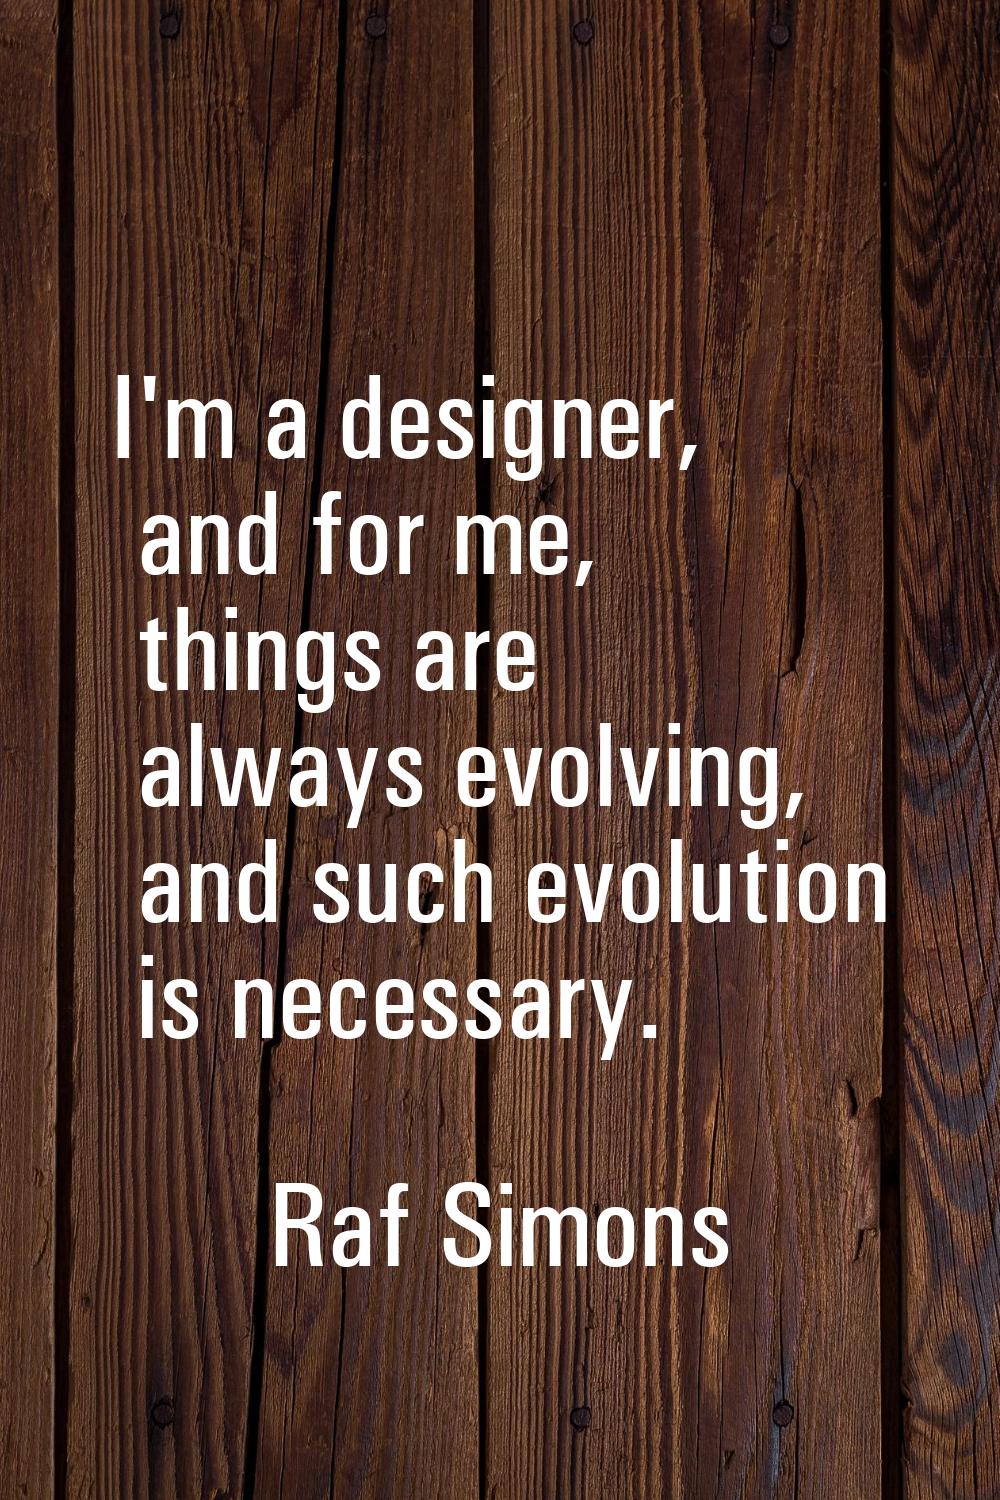 I'm a designer, and for me, things are always evolving, and such evolution is necessary.